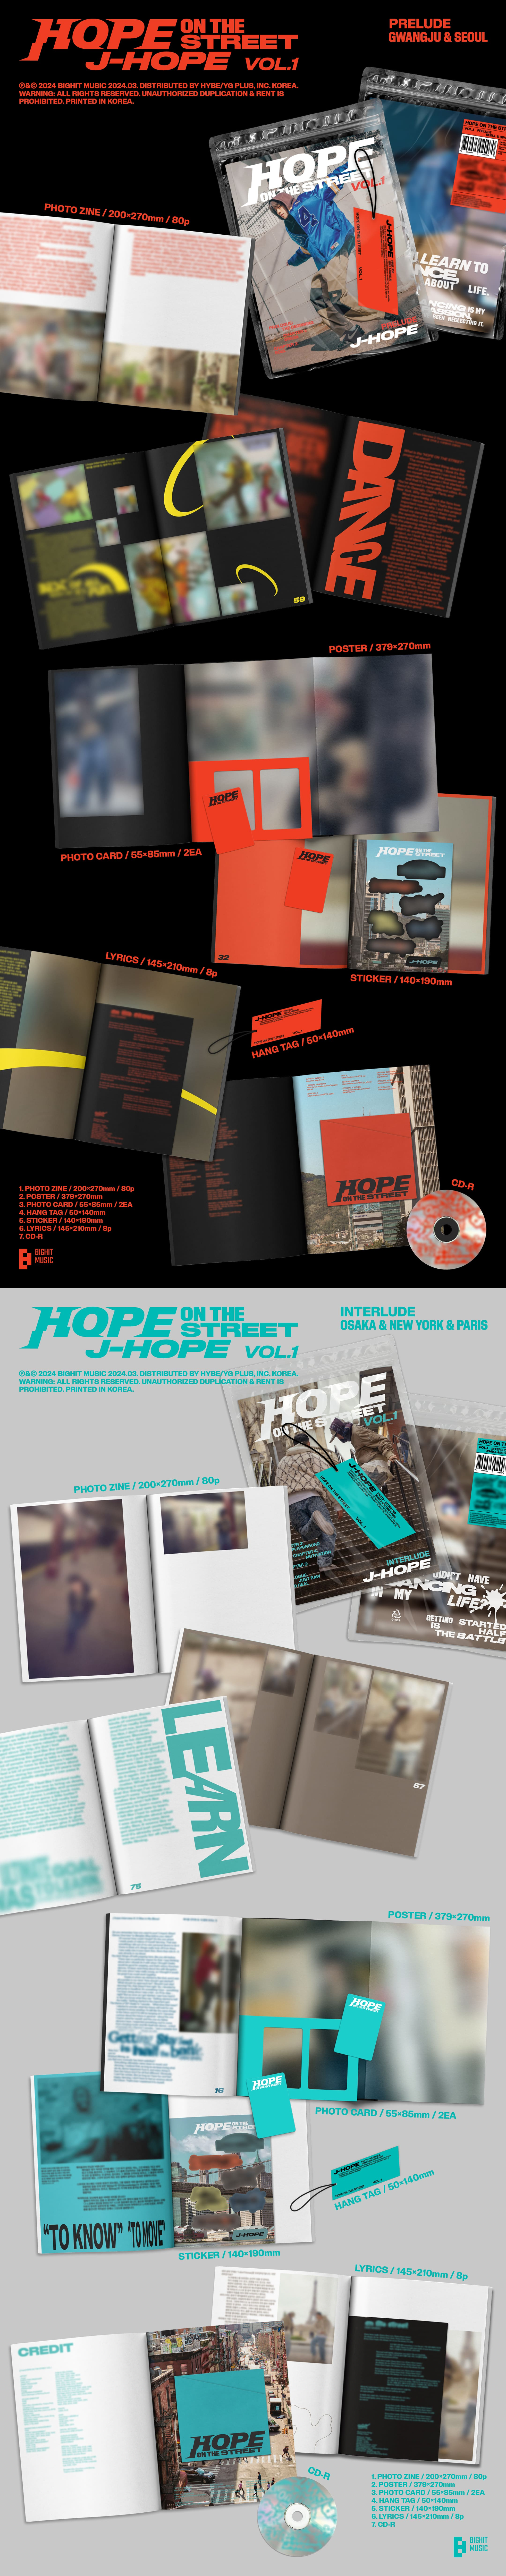 j-hope (BTS) HOPE ON THE STREET VOL.1 with Weverse Gift | UK Kpop Shop